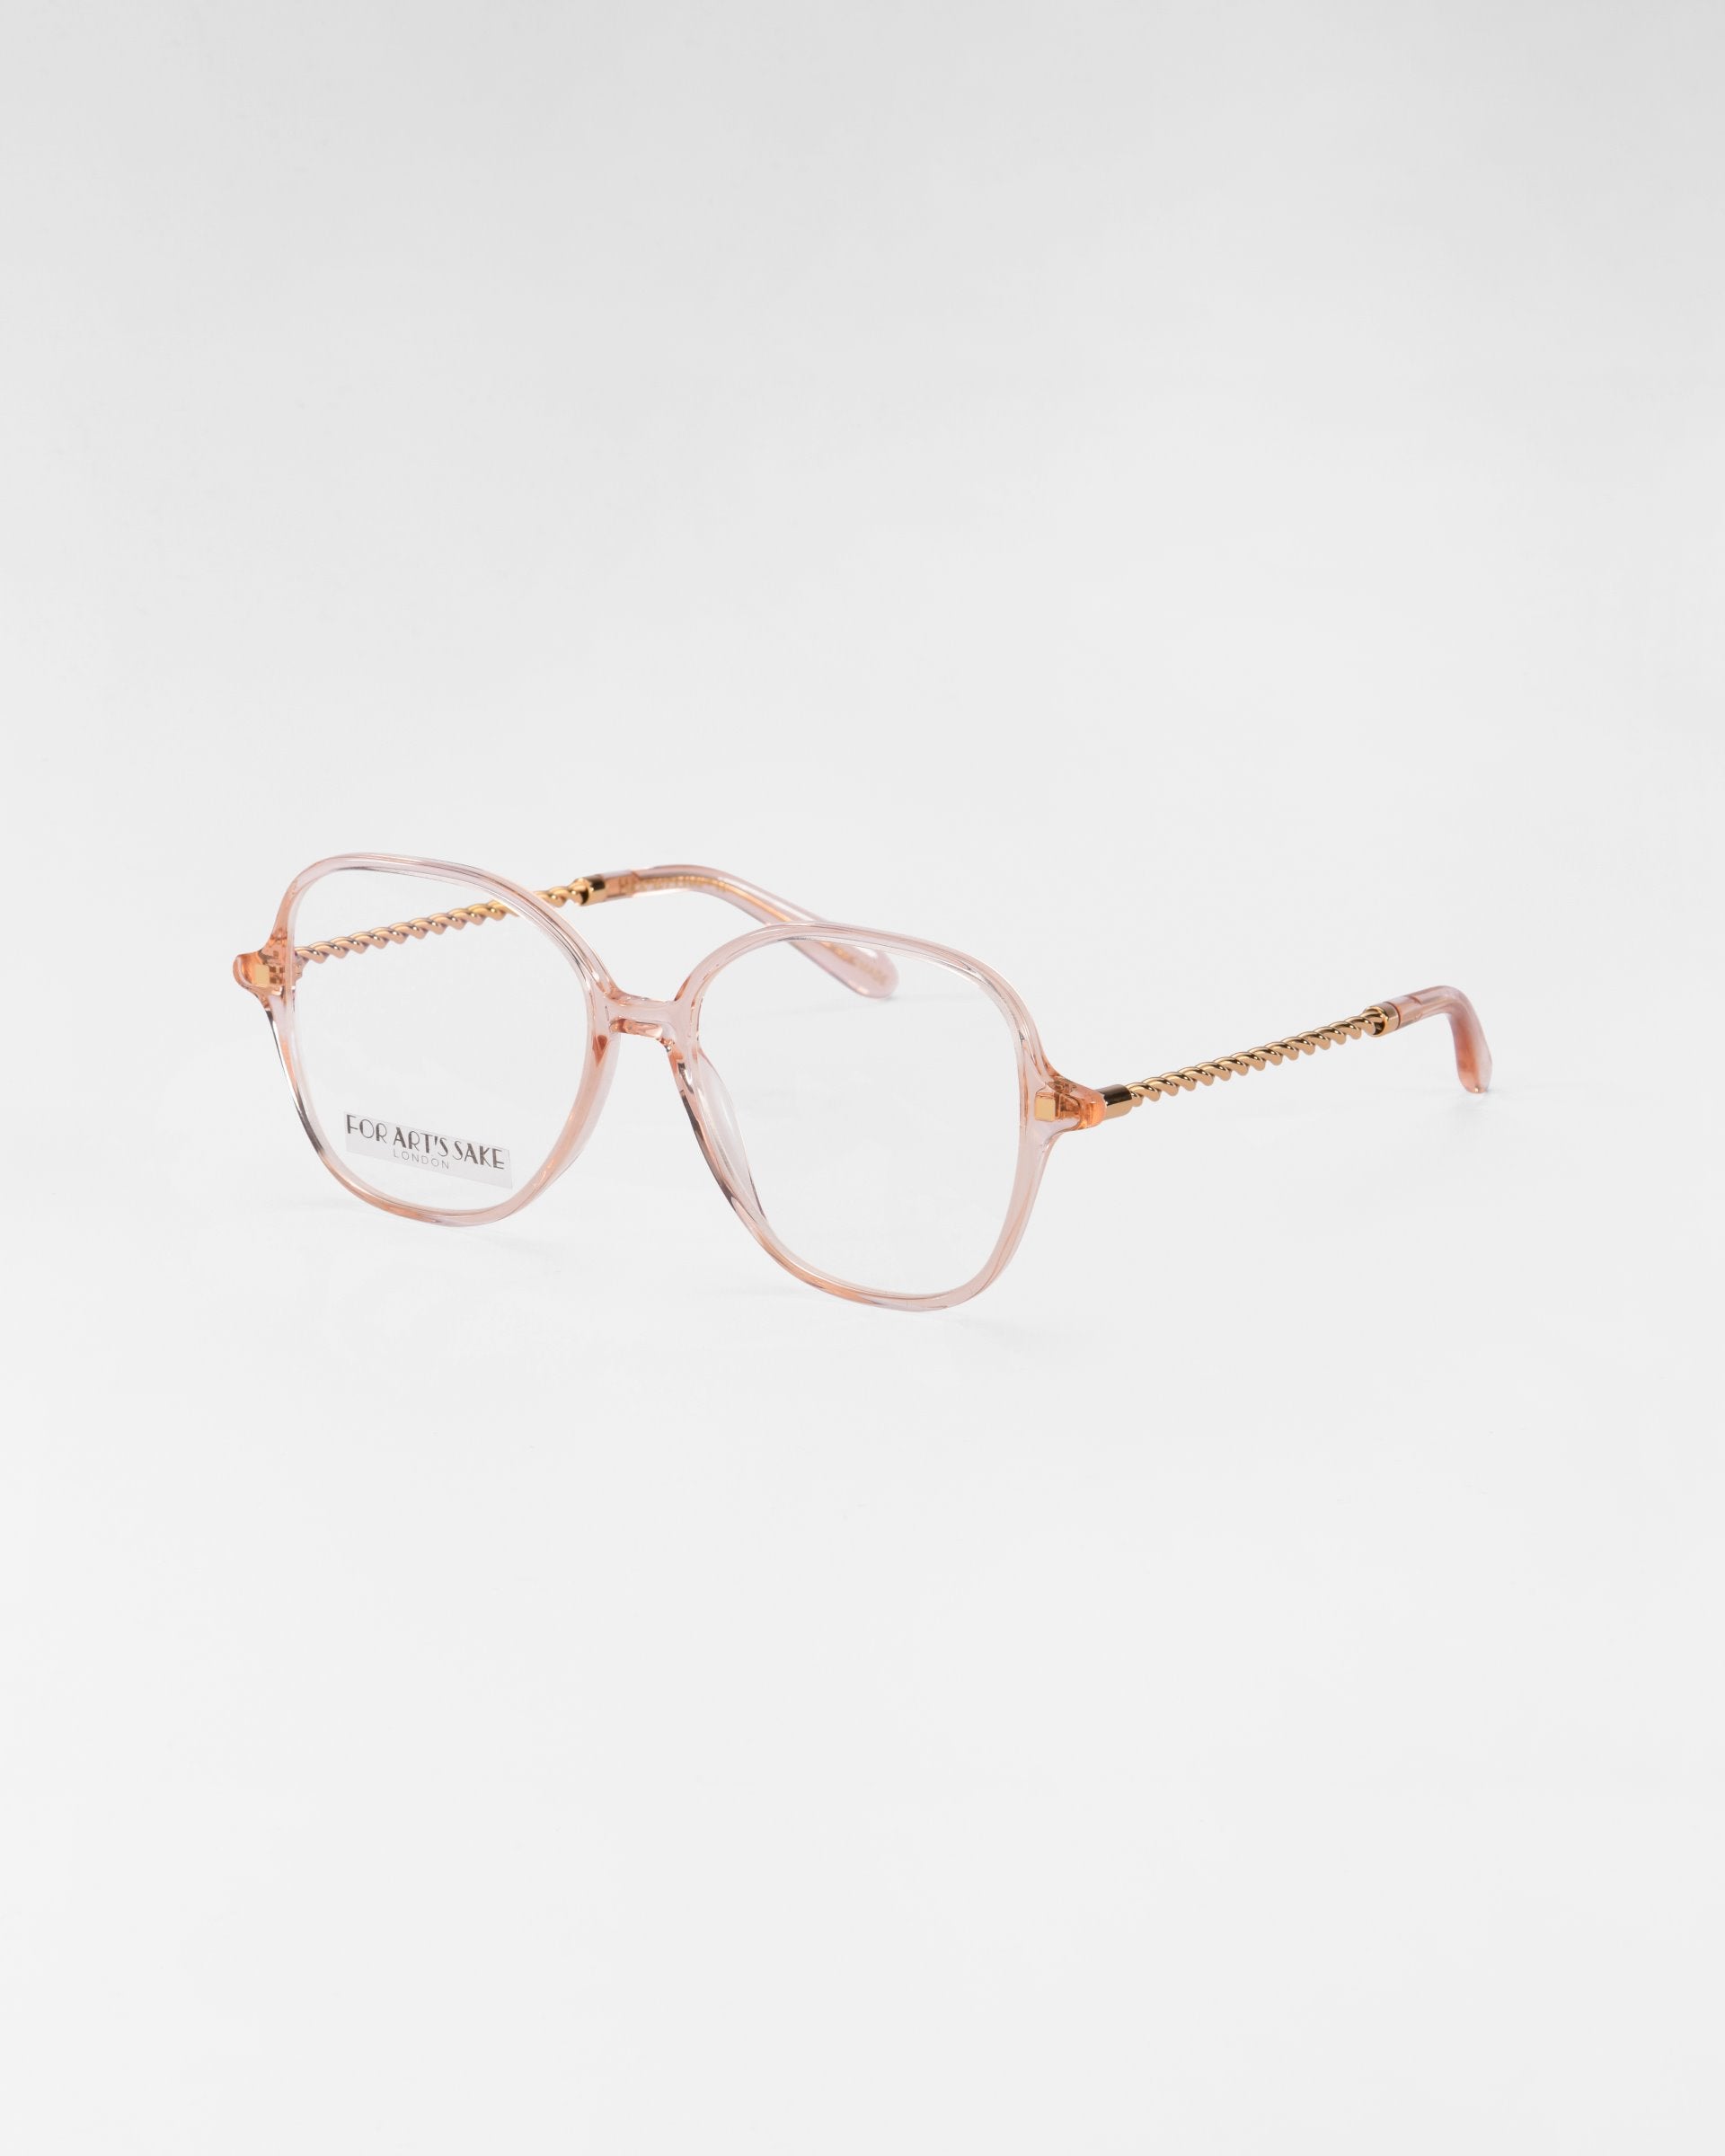 A pair of eyeglasses with translucent pink frames and gold chain-like detail on the temples featuring clear lenses with a subtle blue light filter. The brand name &quot;For Art&#39;s Sake®&quot; is visible on the left lens, all set against a plain white background.